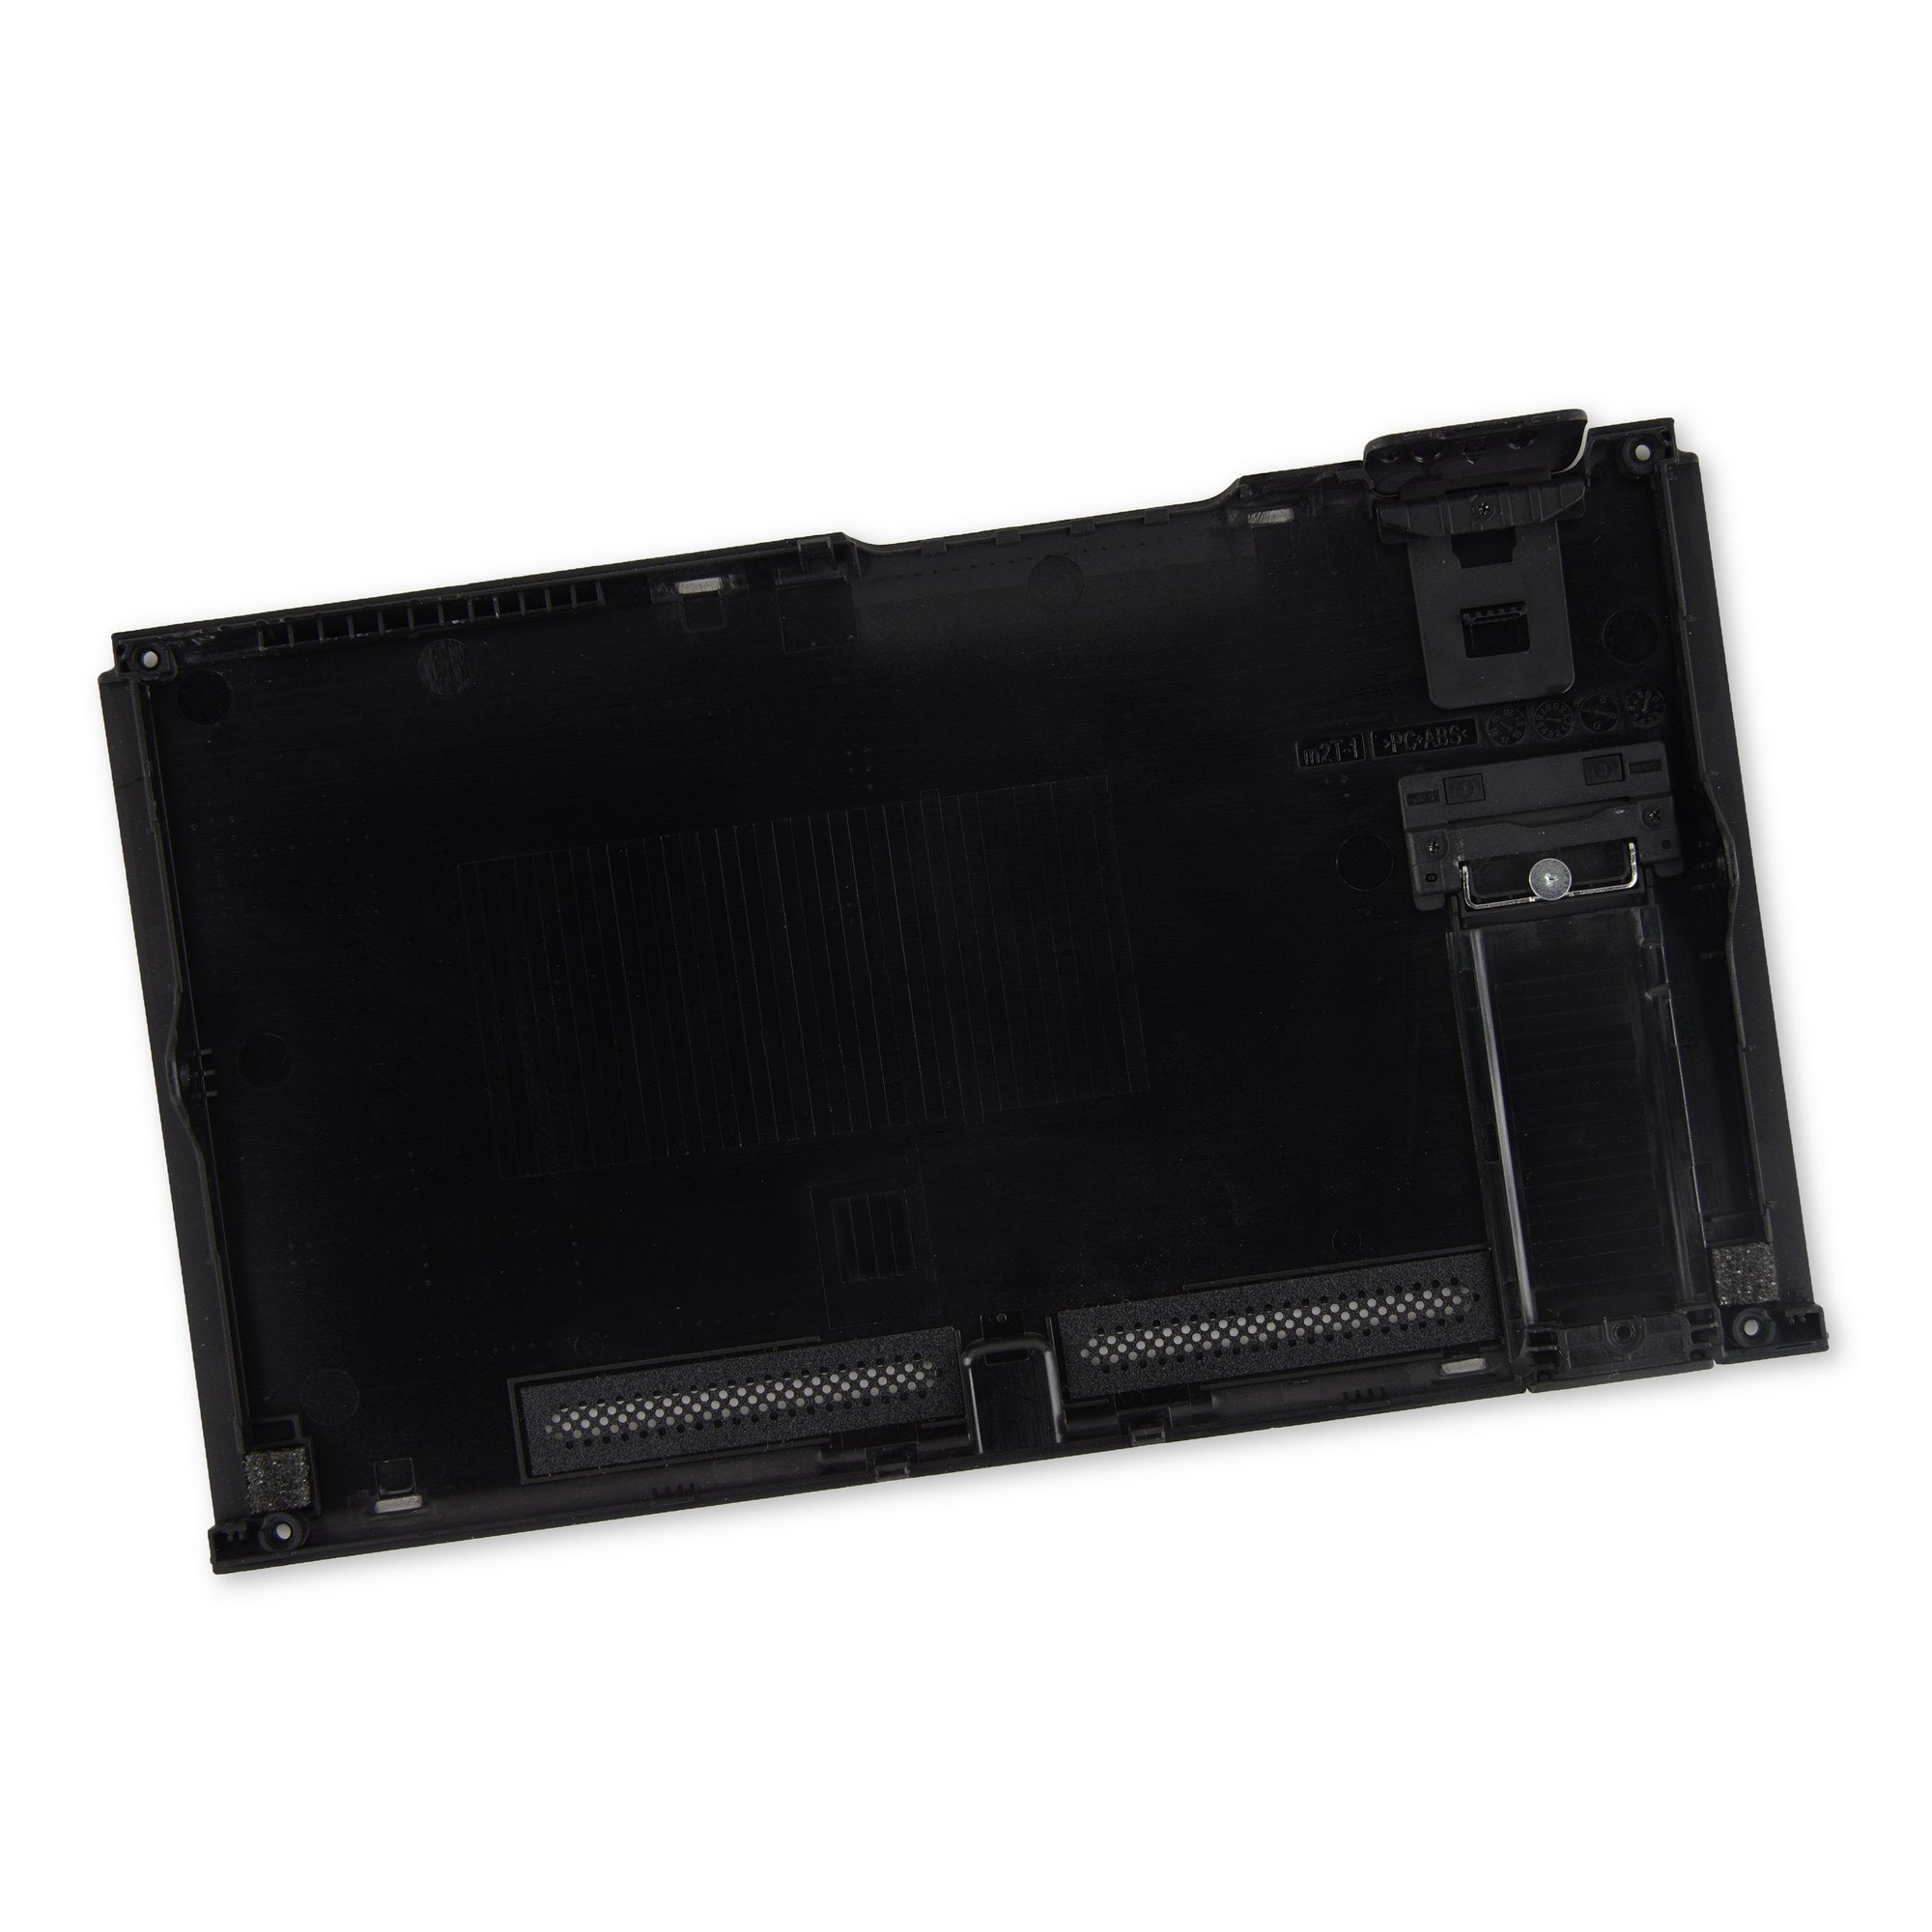 Nintendo Switch Rear Panel Used, A-Stock Black